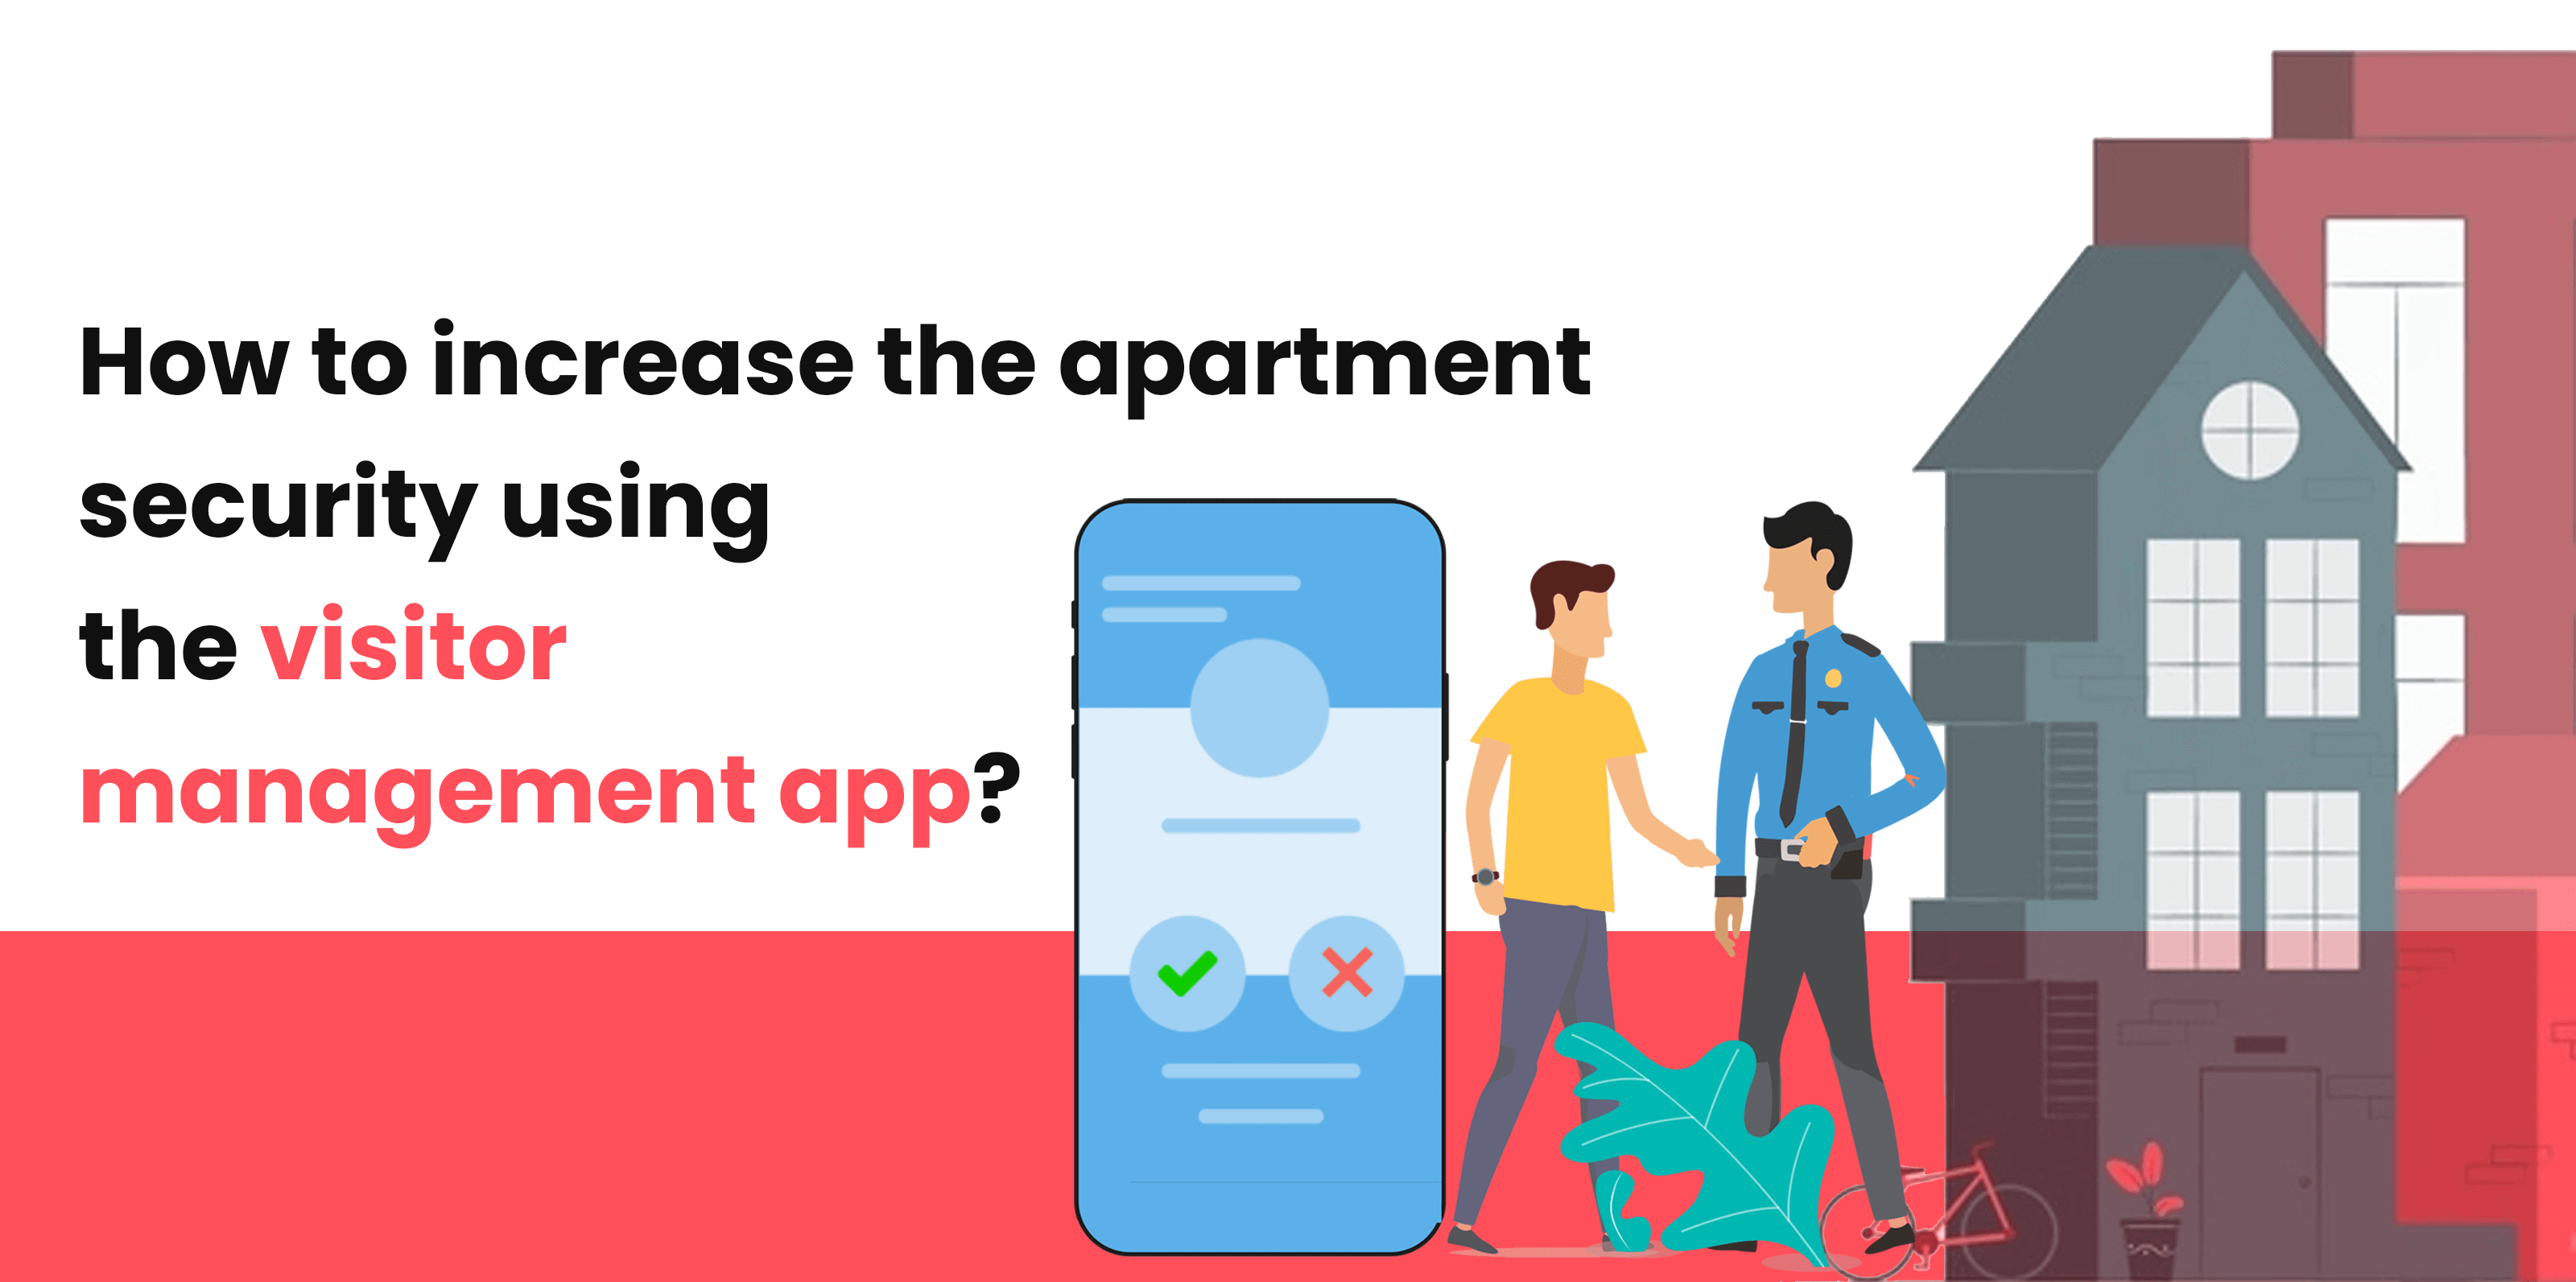 How-to-increase-the-apartment-security-using-the-visitor-management-app